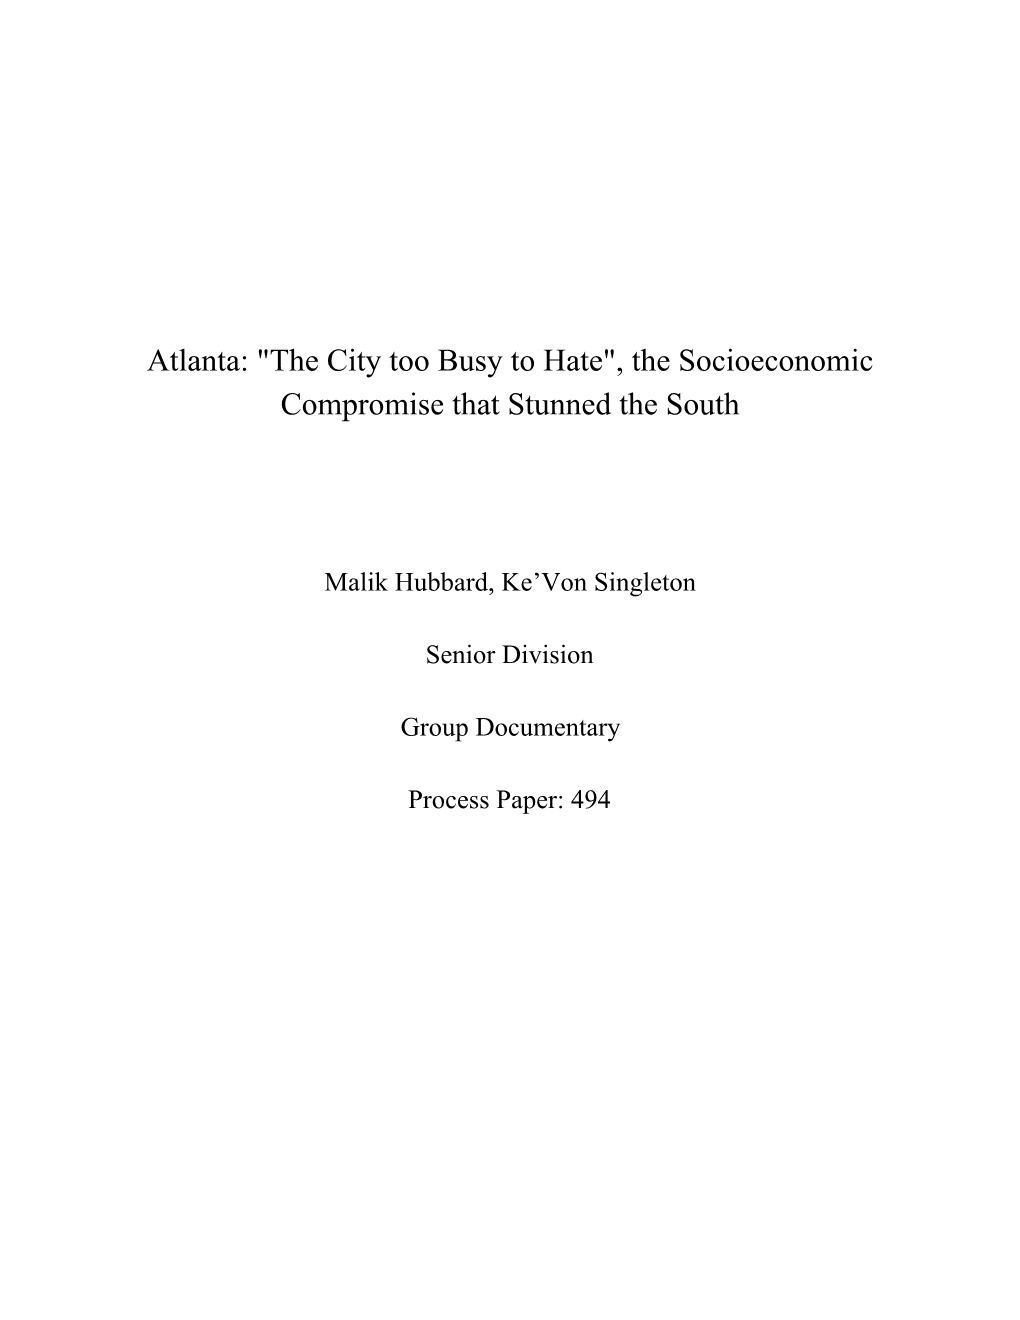 Atlanta: "The City Too Busy to Hate", the Socioeconomic Compromise That Stunned the South